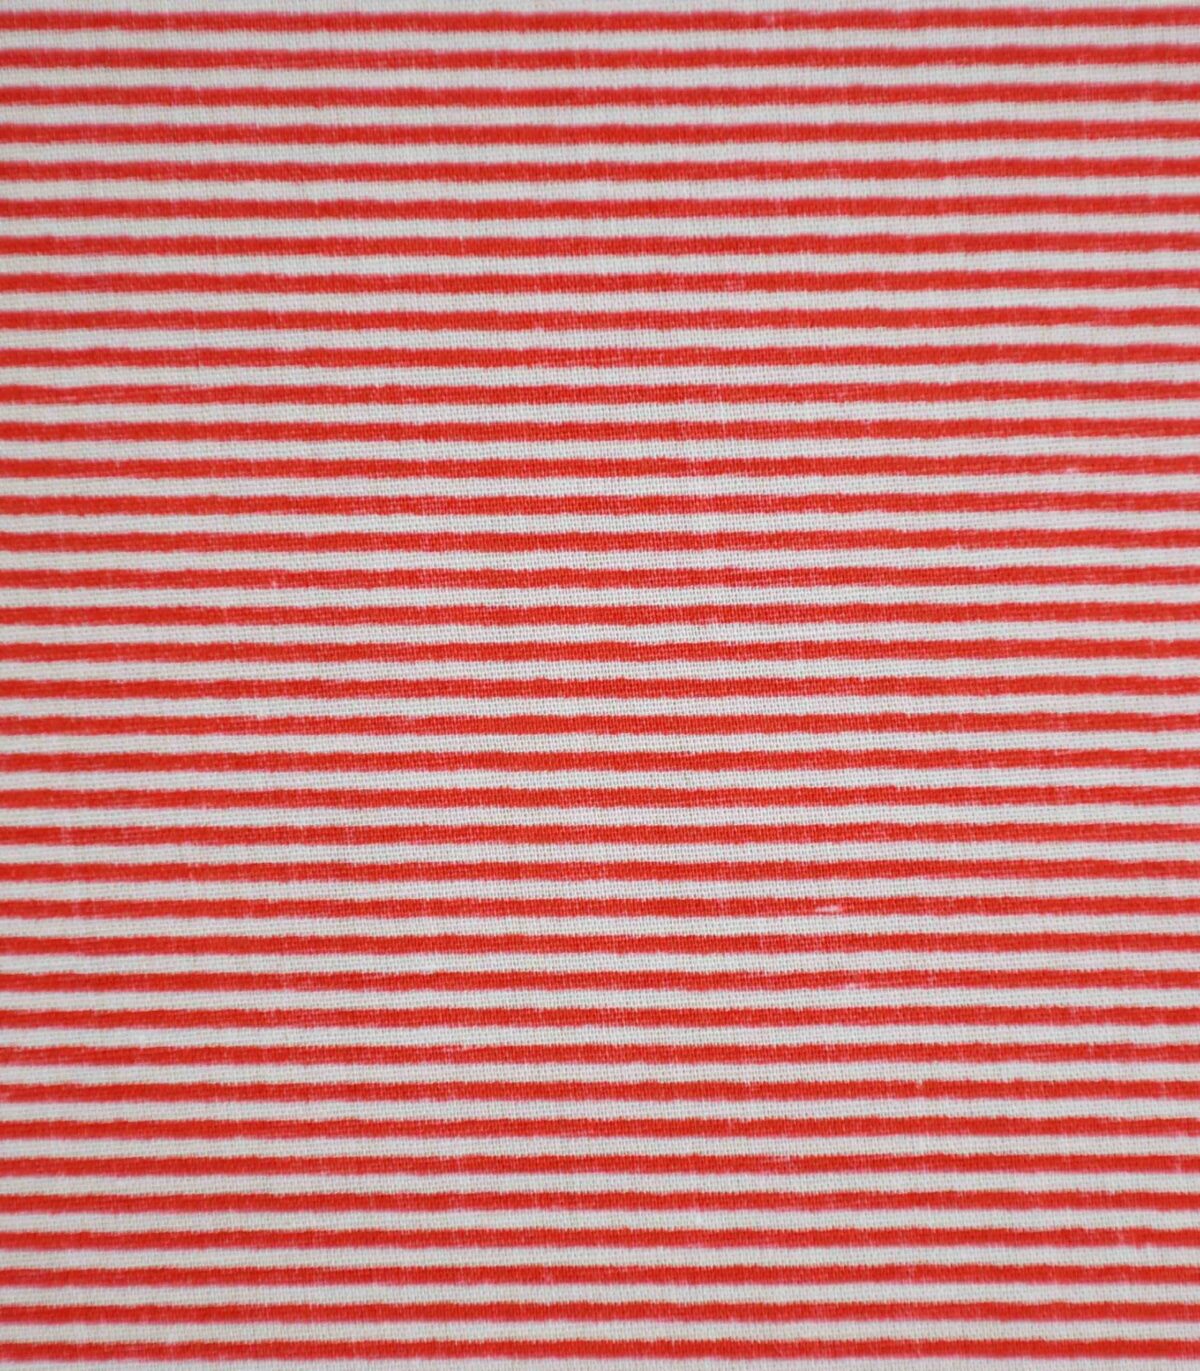 Red Color Weft Stripe Print Fabric